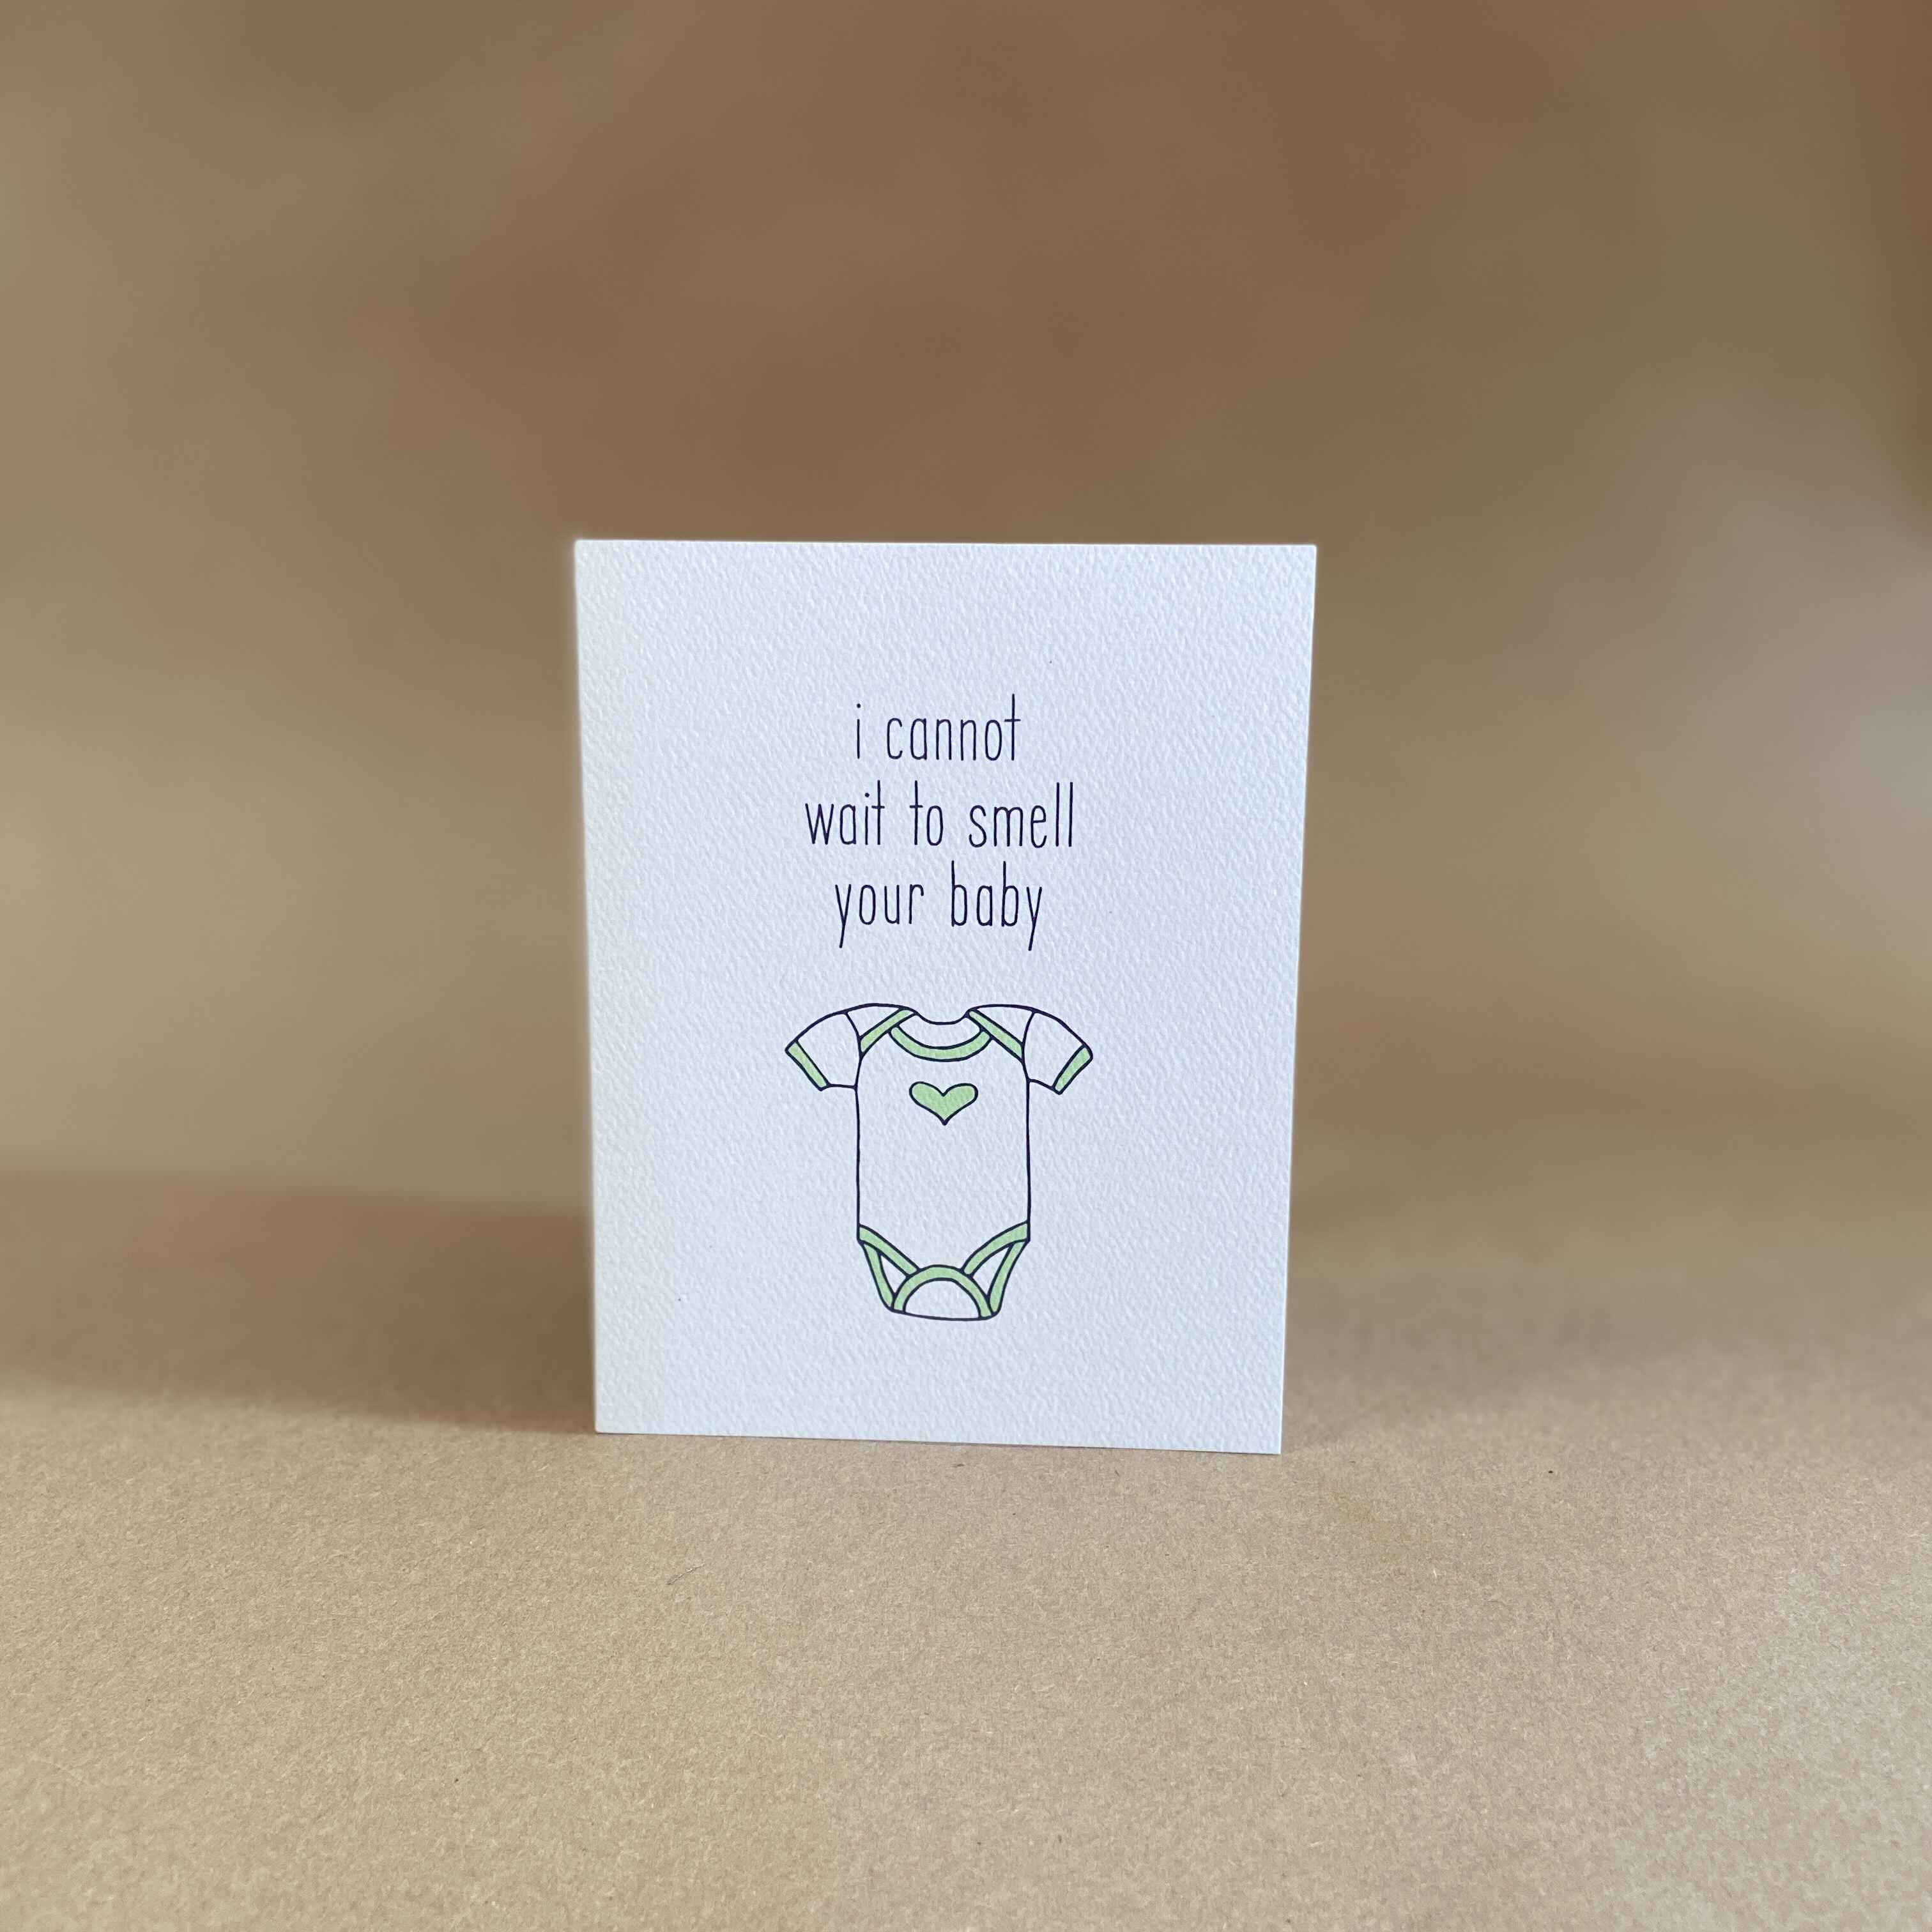 Tiny Hooray Stationery I Cannot Wait to Smell Your Baby Card